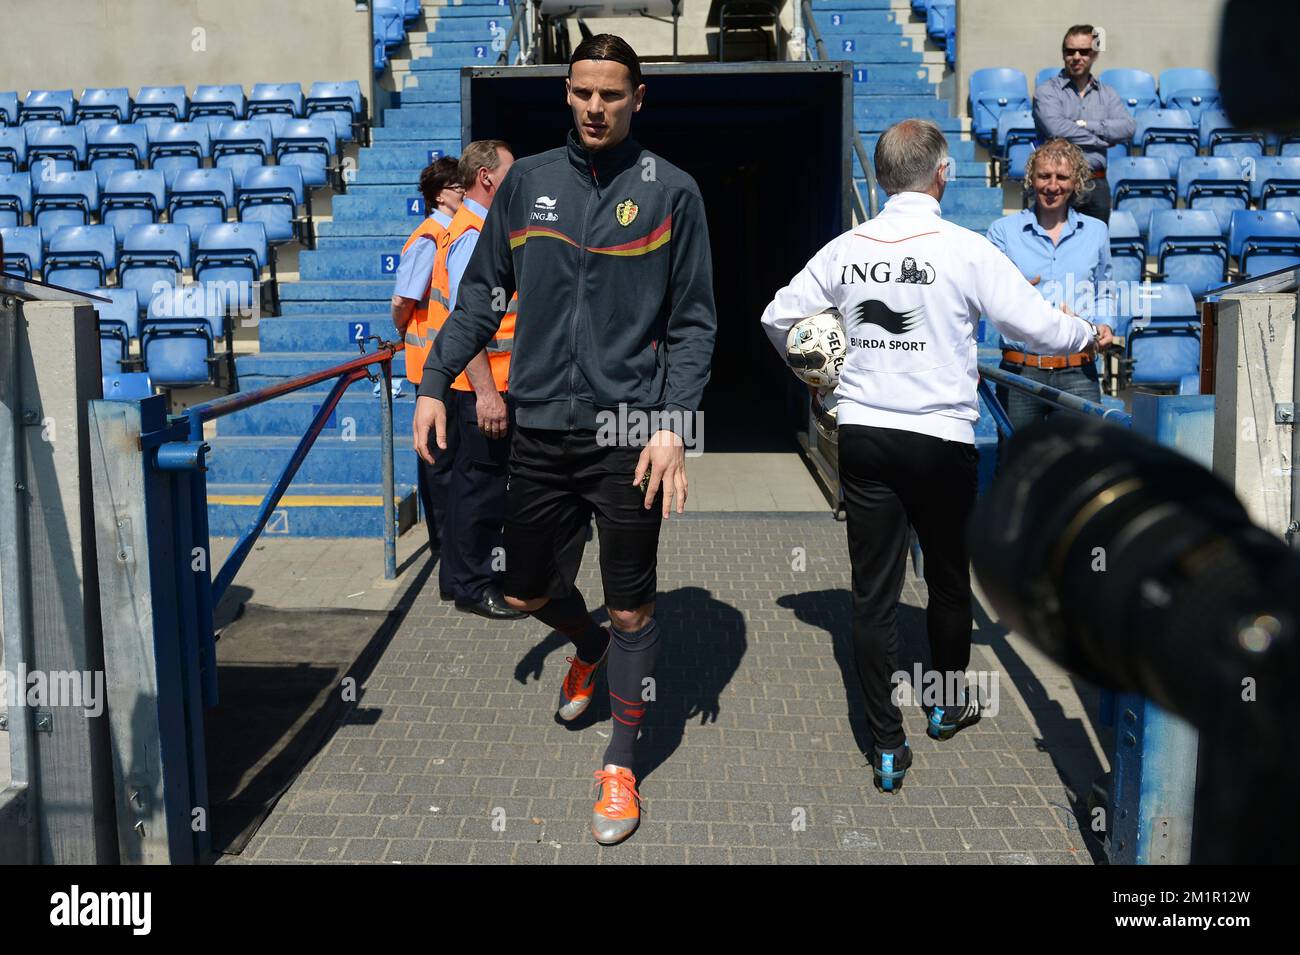 Belgium's Daniel Van Buyten arrives for a training session of the Belgium national soccer team, Wednesday 05 June 2013 in Genk. The Red Devils are preparing for their qualification game for the 2014 FIFA World Cup against Serbia on June 7.  Stock Photo